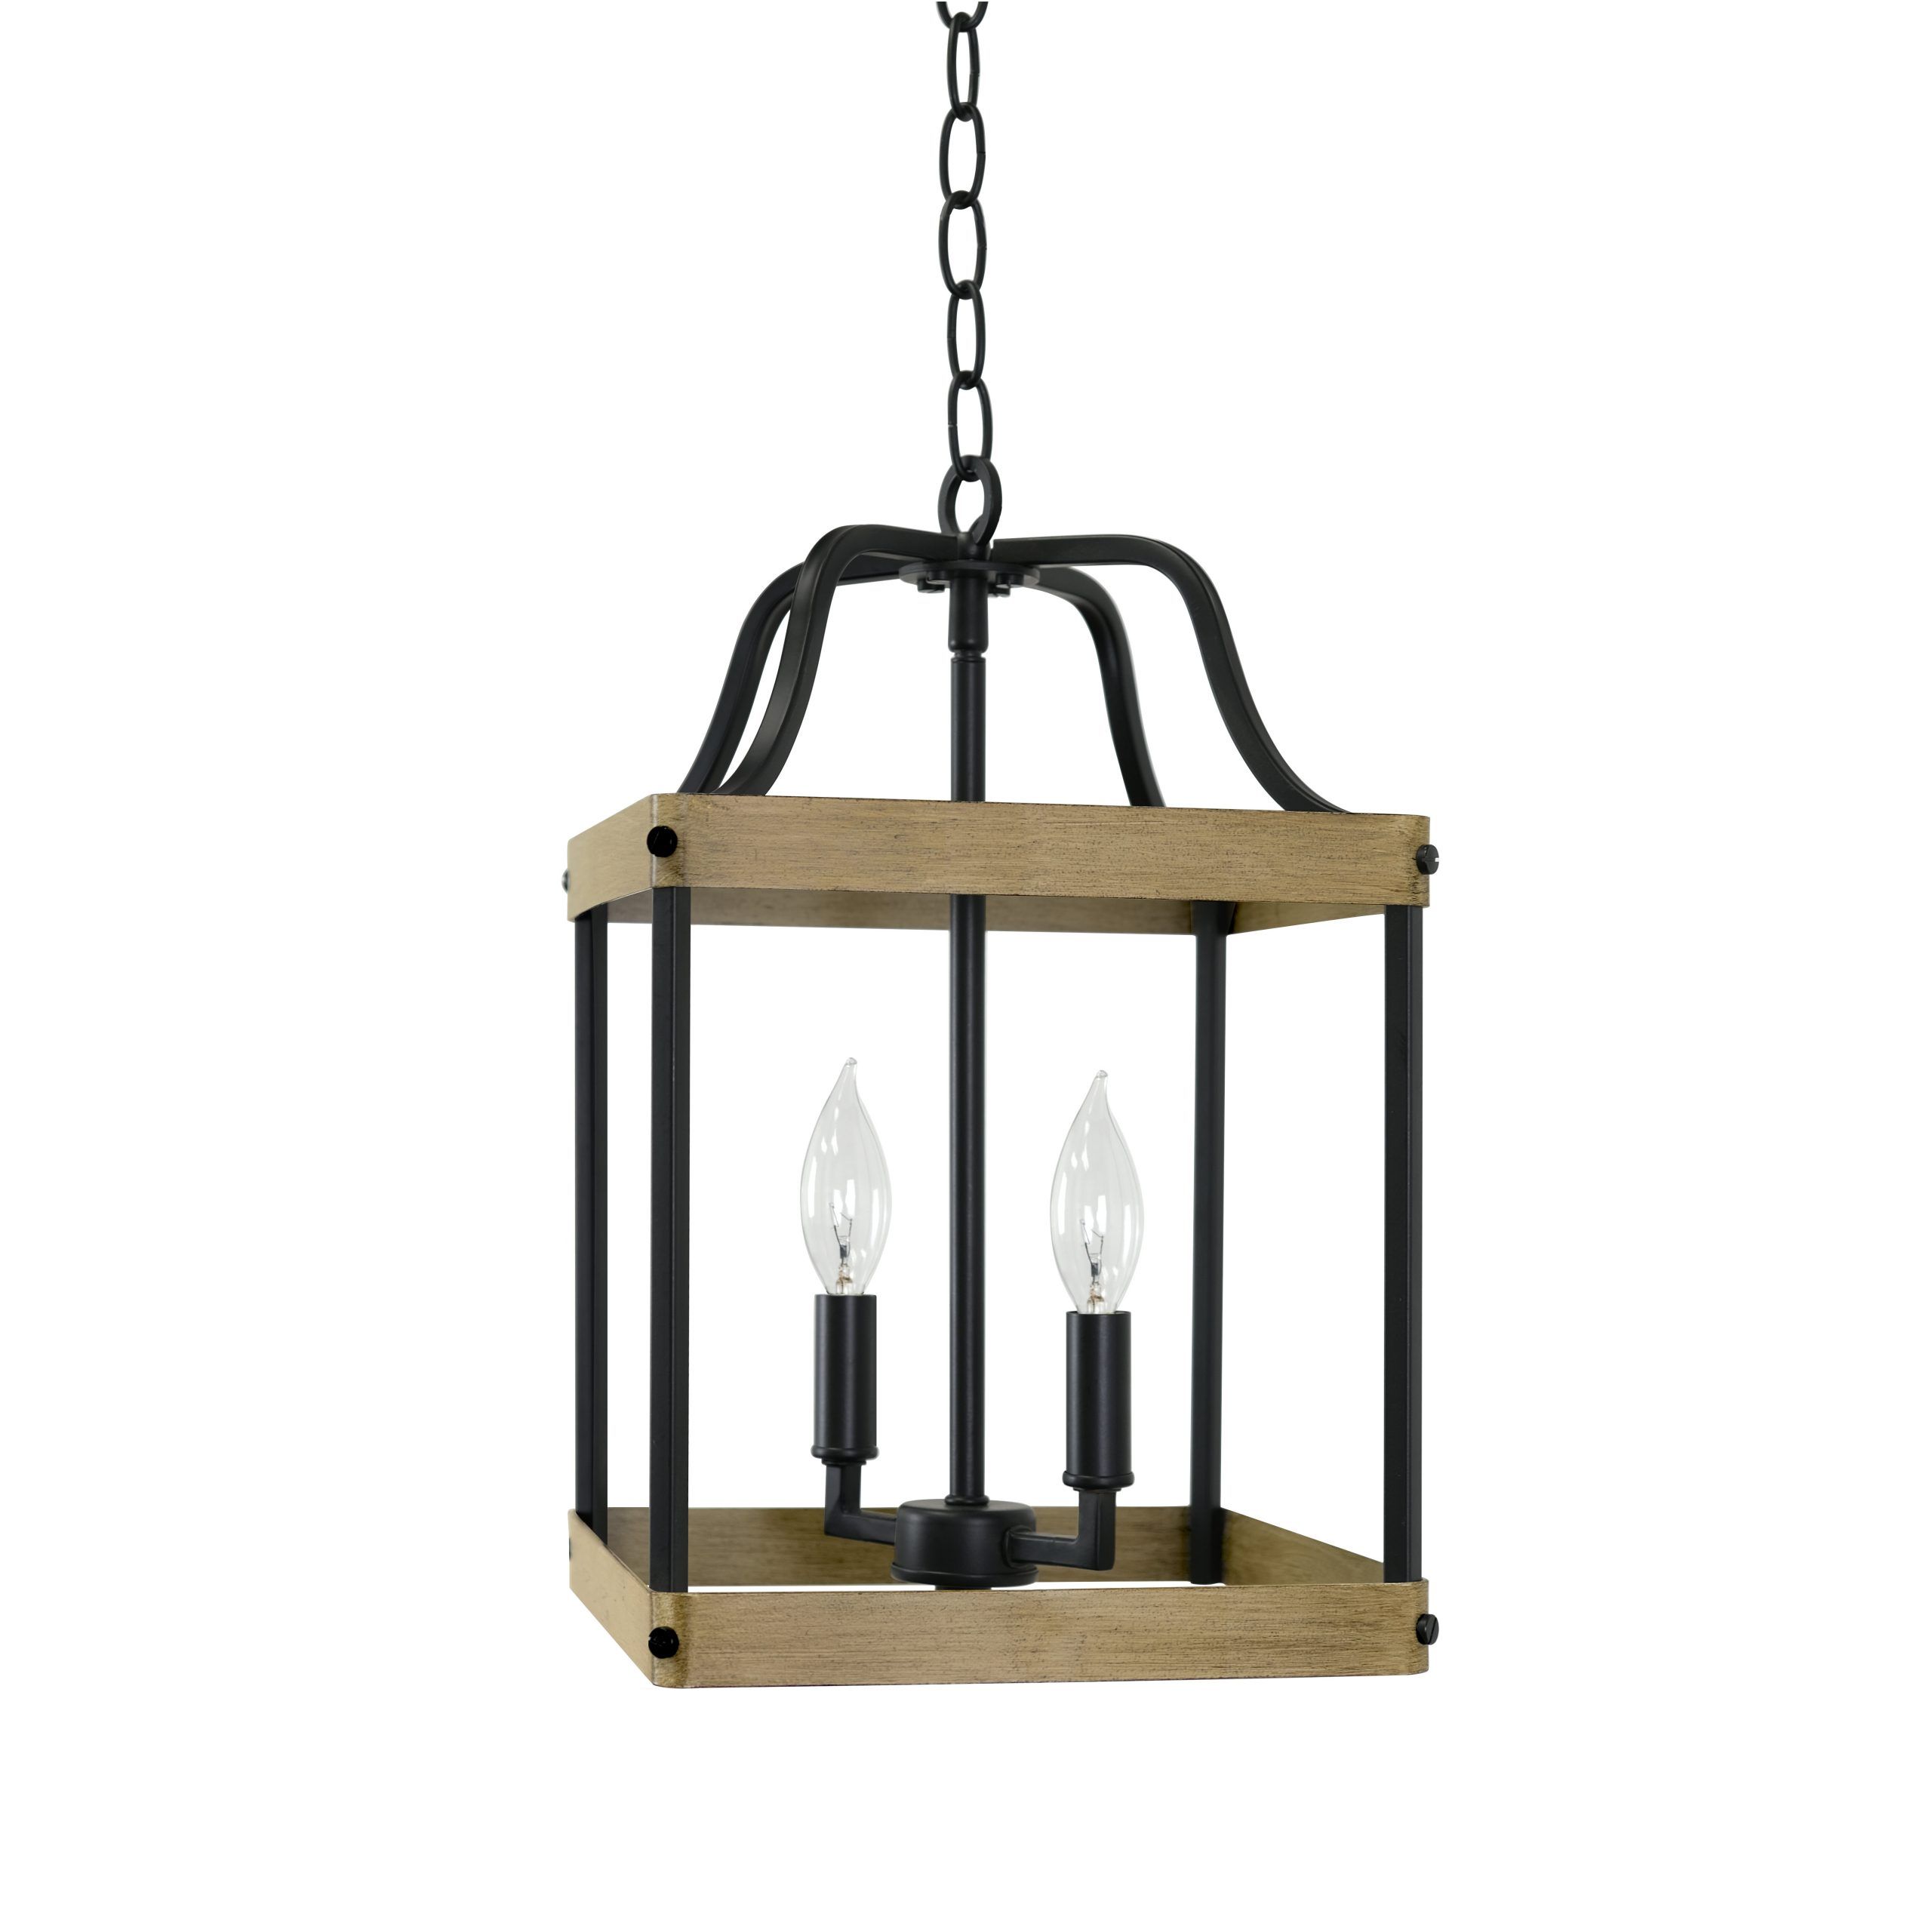 Wayfair Throughout Popular Two Light Lantern Chandeliers (View 7 of 15)